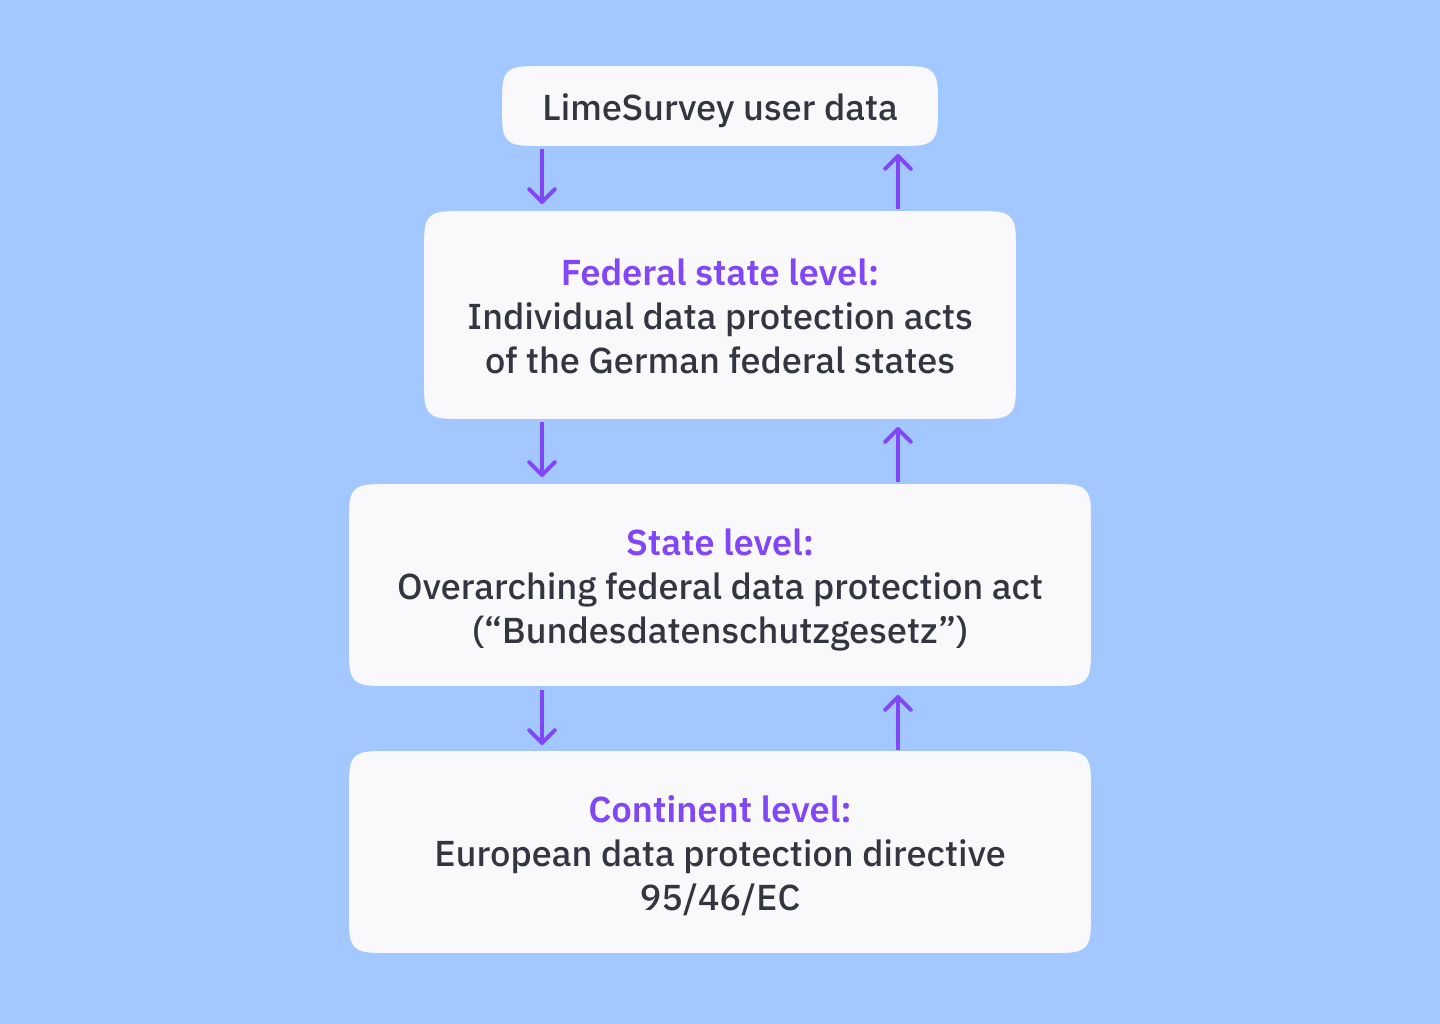 Data security on federal and continent level